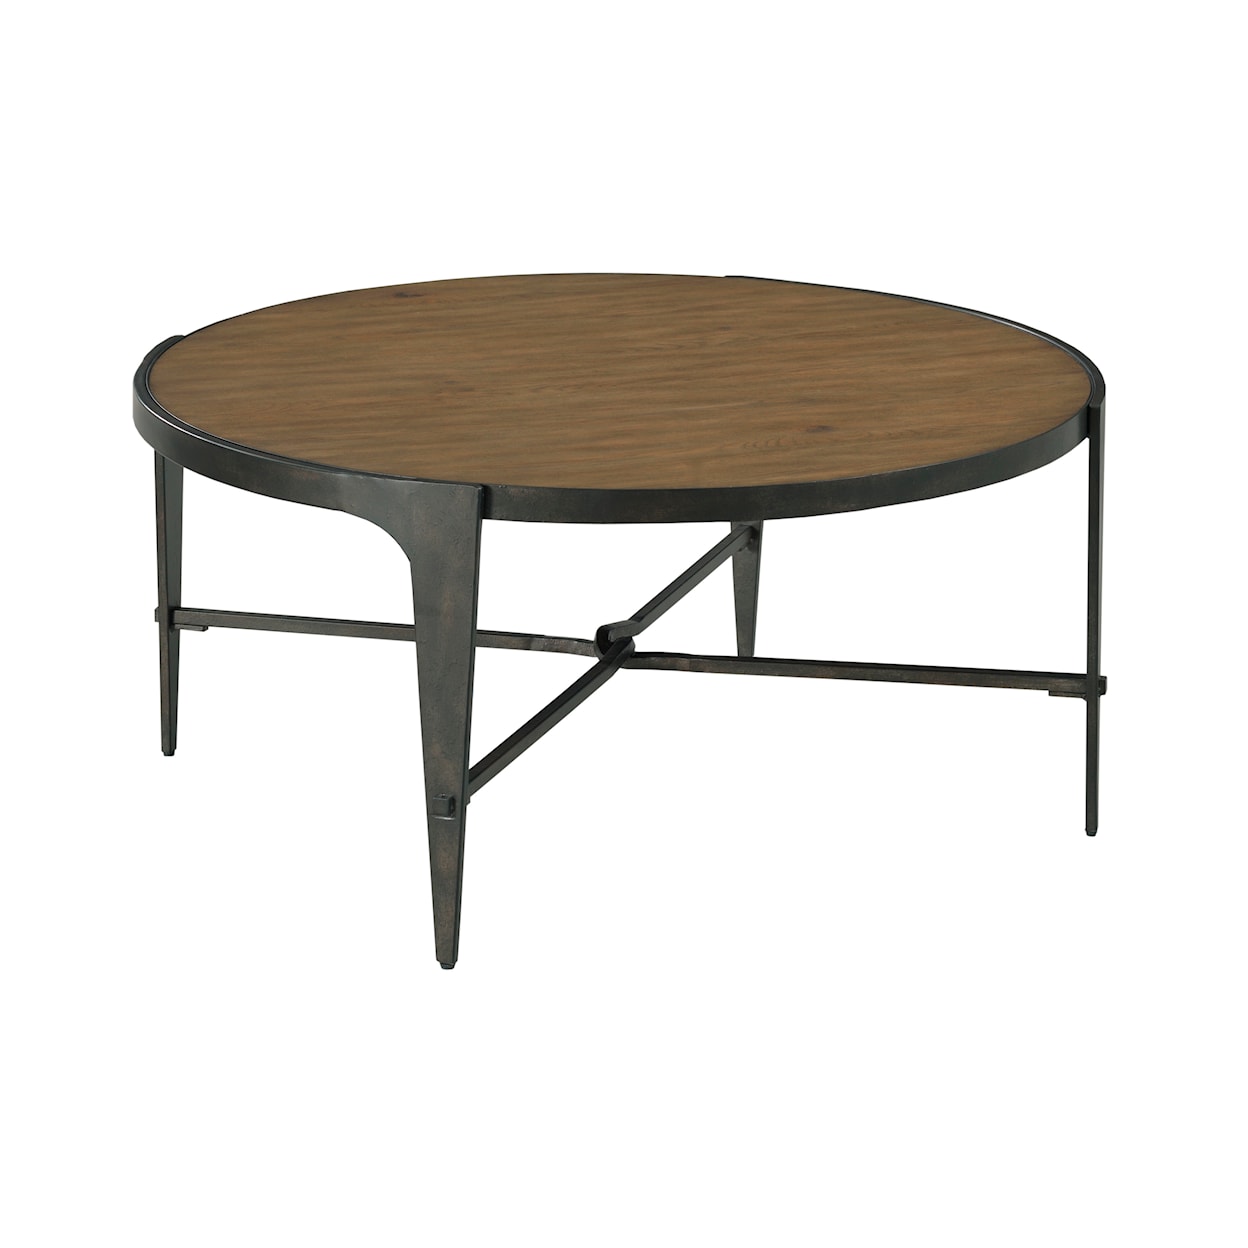 Hammary Olmsted Round Coffee Table